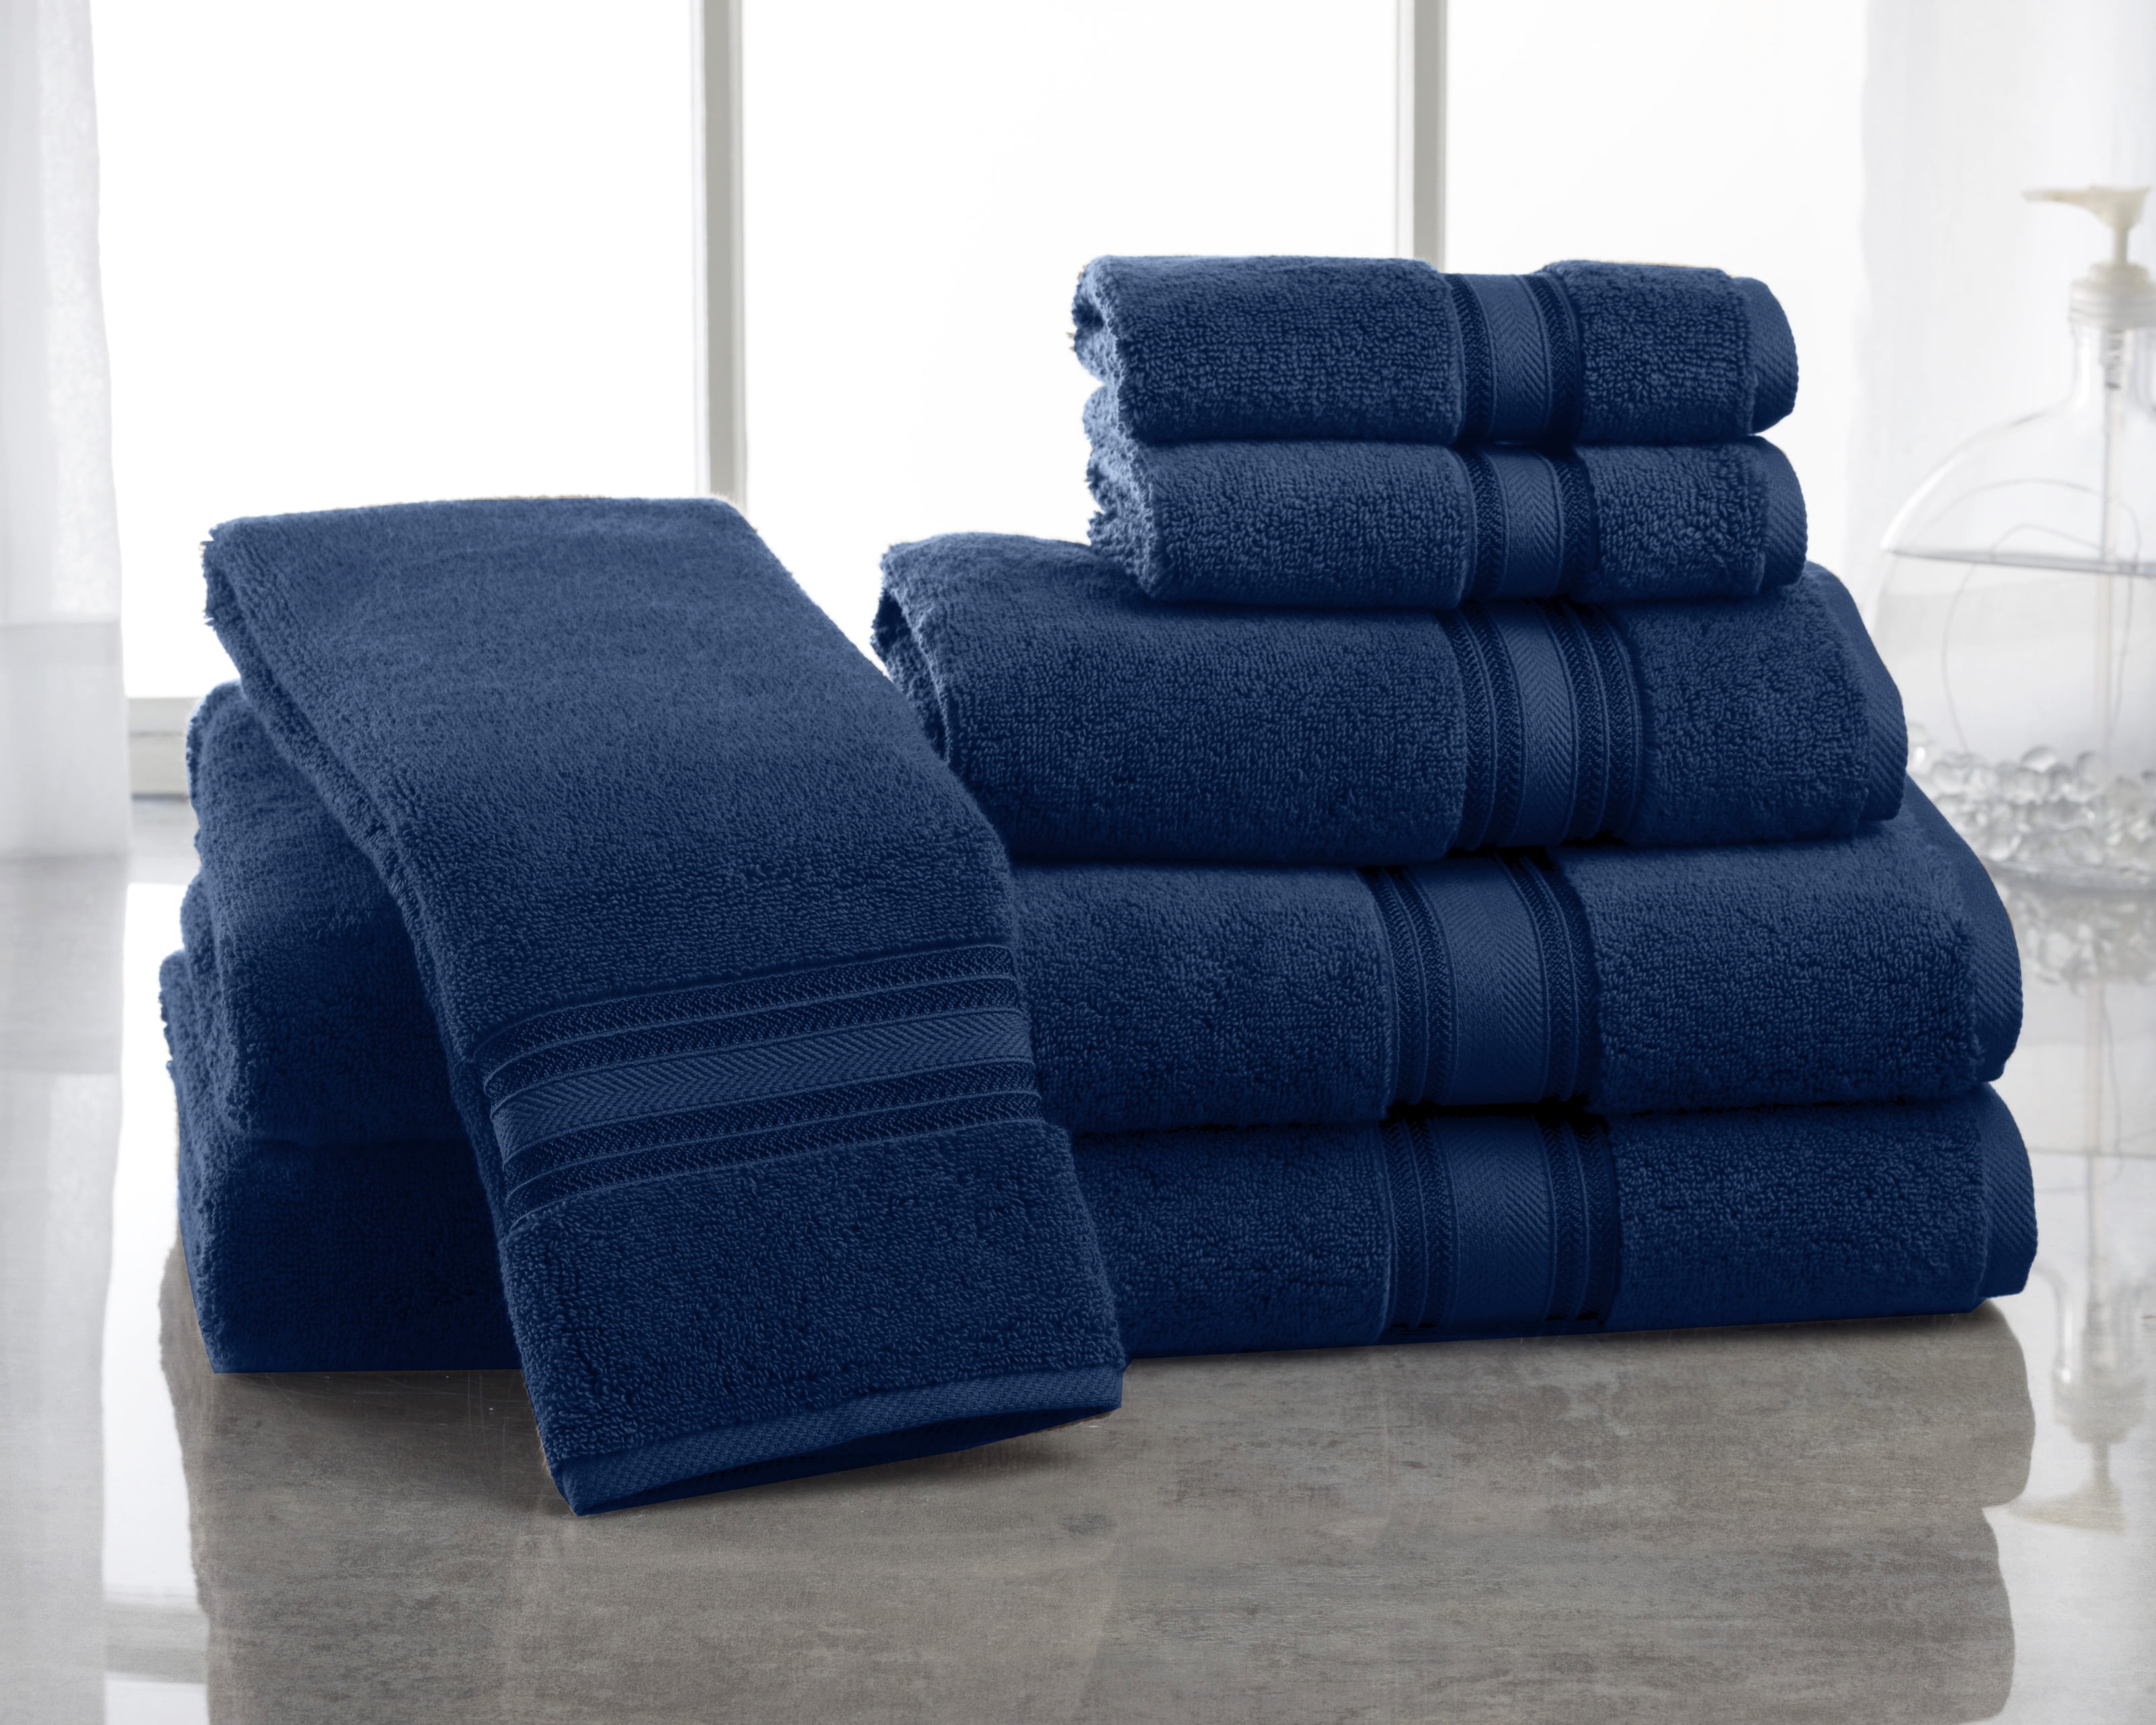 Belizzi Home Cotton 2 Pack Oversized Bath Towel Set 28x55 inches, Large Bath  Towels, Ultra Absorbant Compact Quickdry & Lightweight Towel, Ideal for Gym  Travel Camp Pool - Charcoal Grey